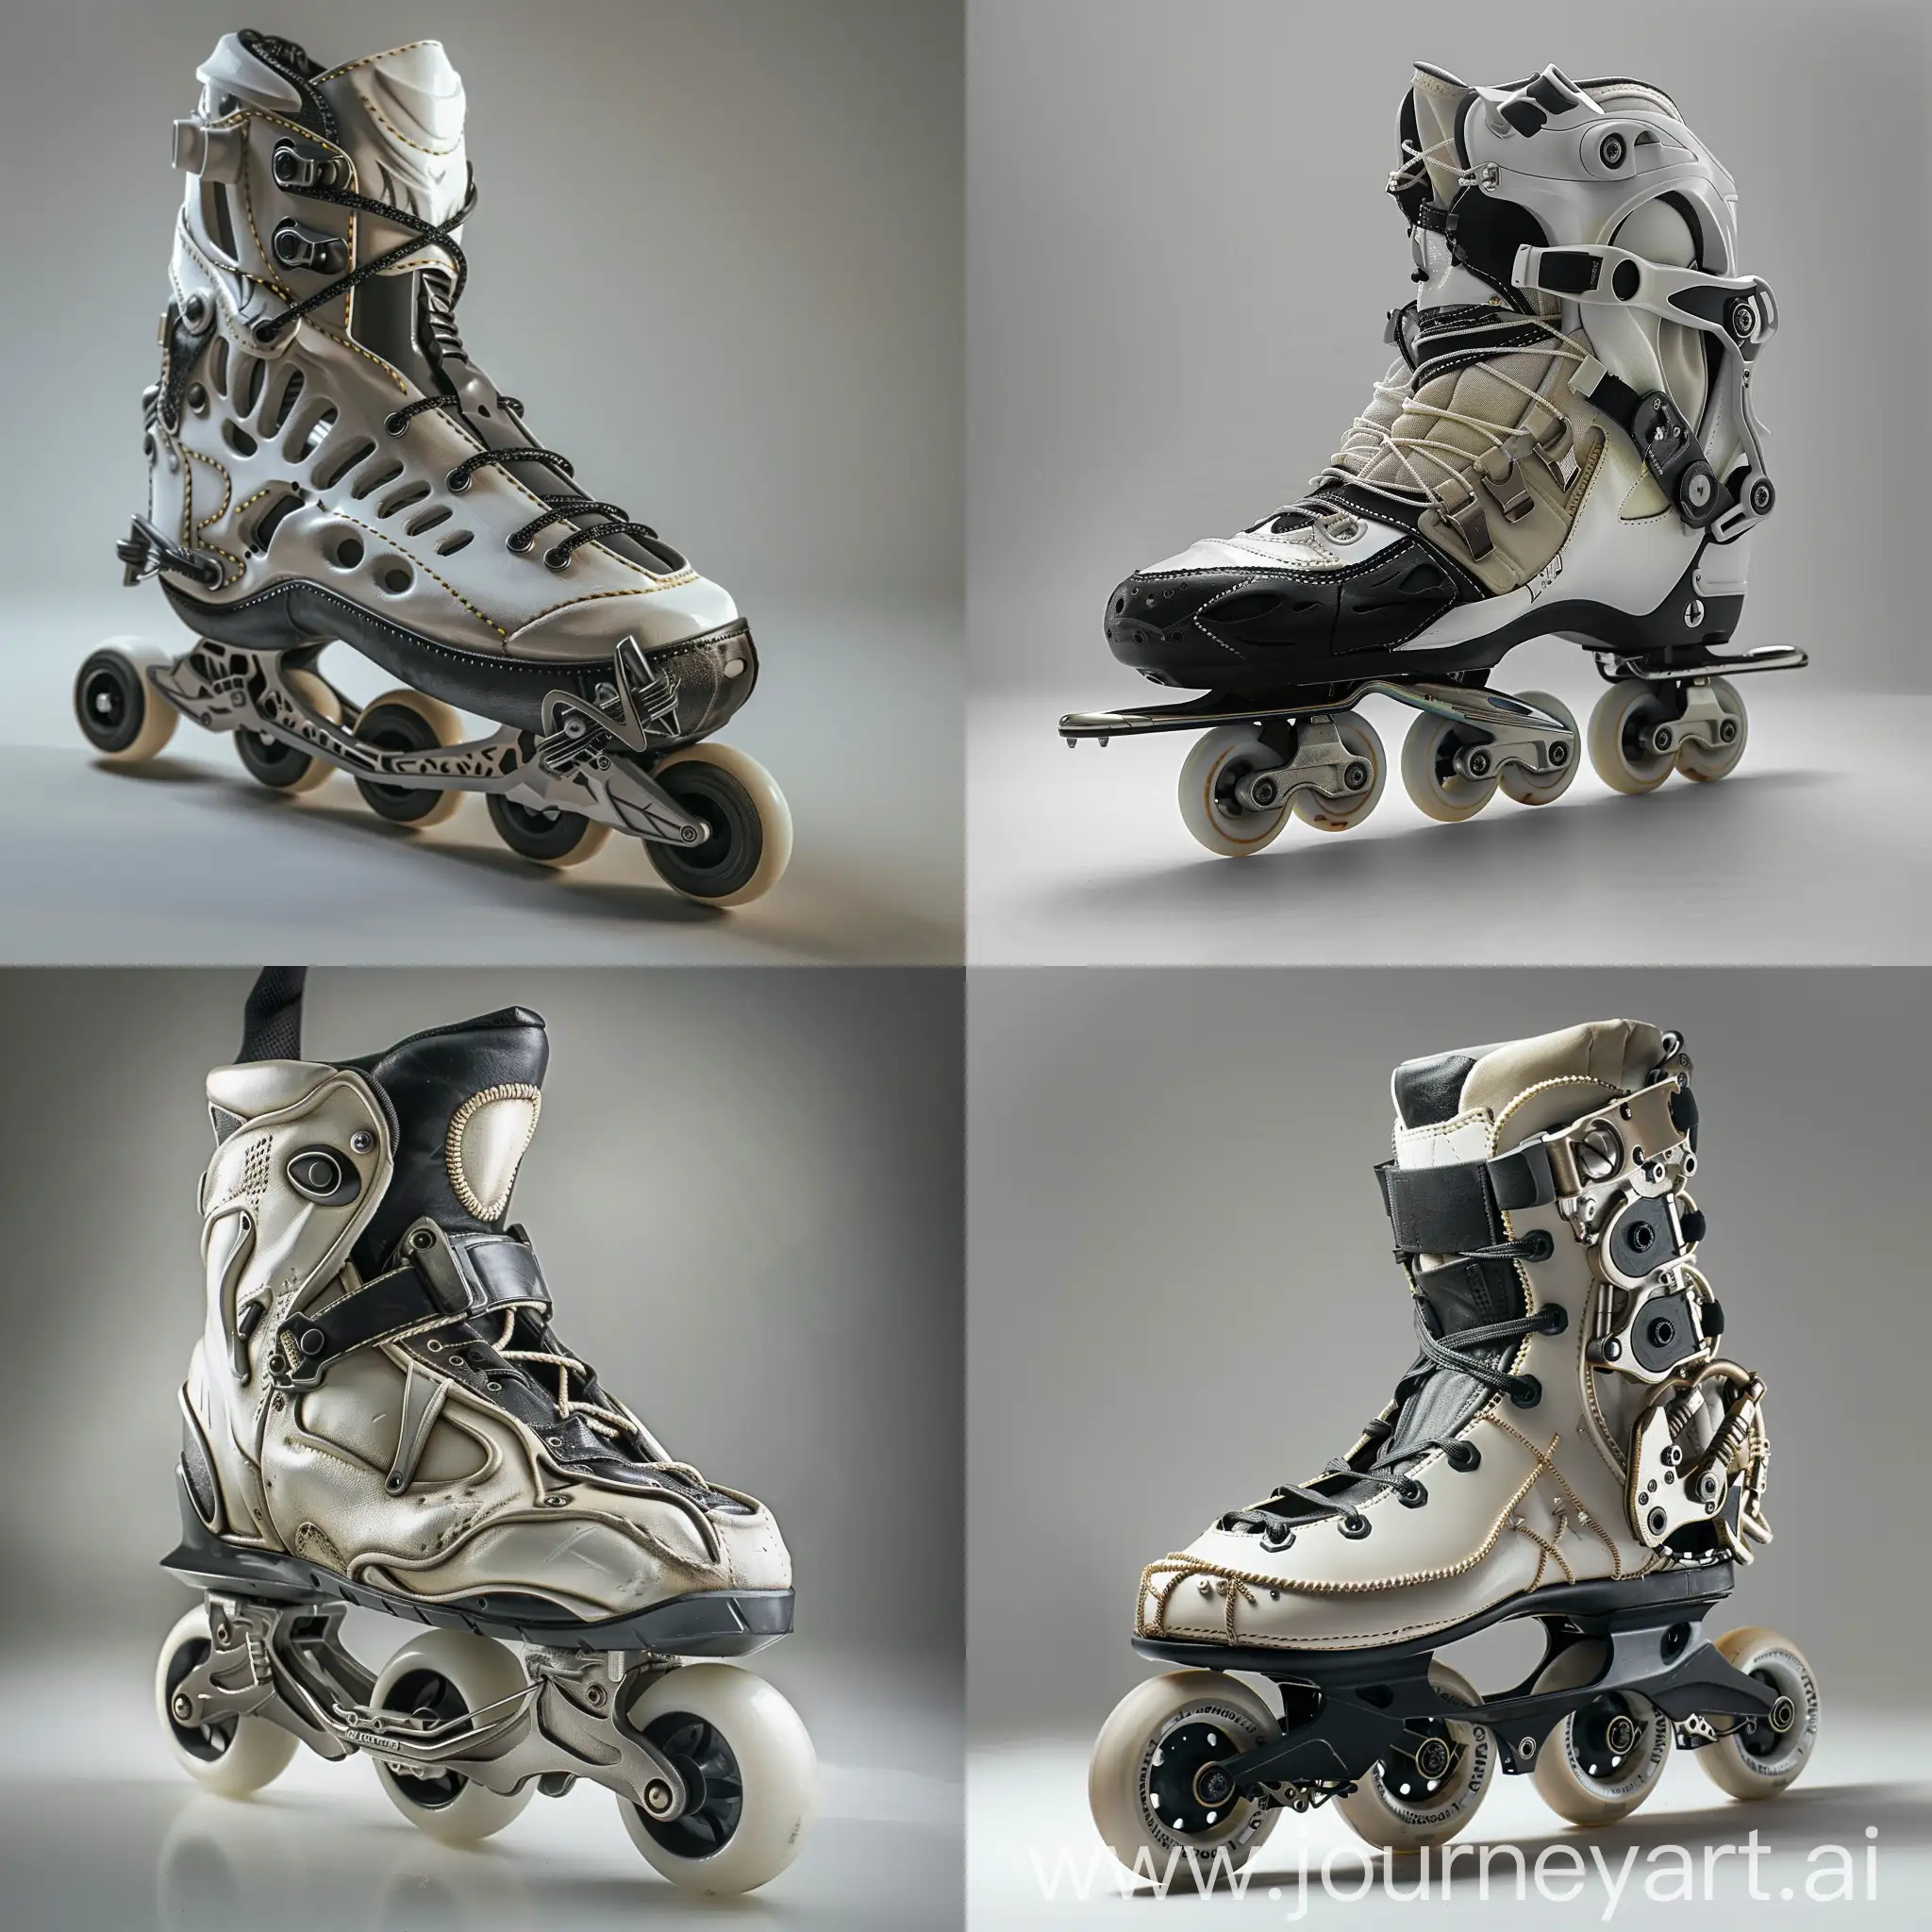 Futuristic-Cyberpunk-Roller-Skate-with-Exaggerated-Metal-Accents